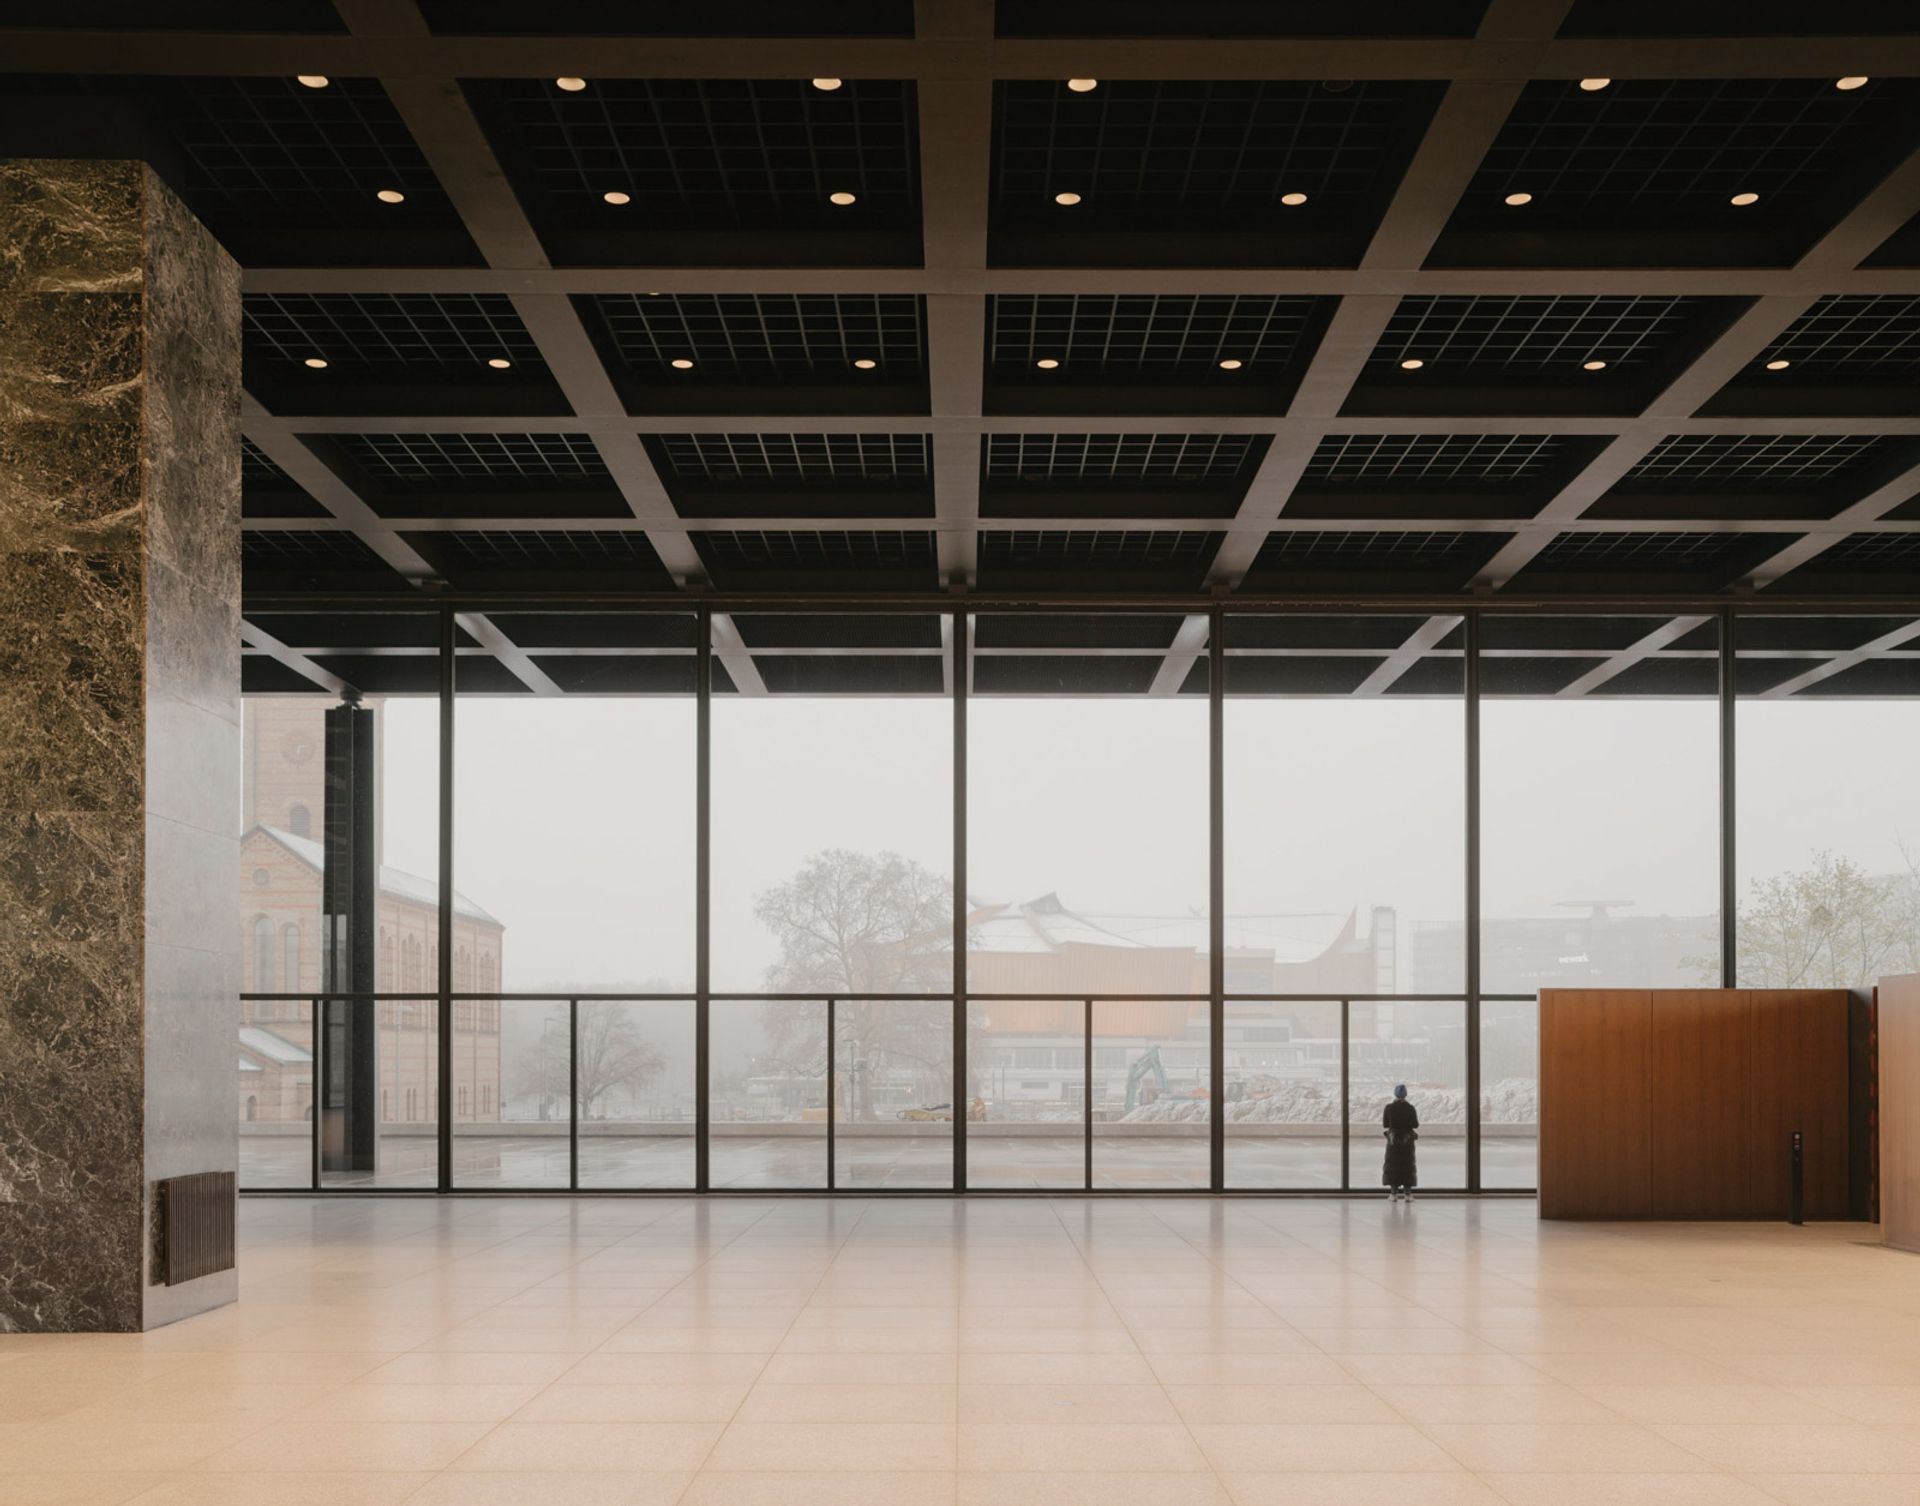 The Neue Nationalgalerie's spectacular temple-like main hall after refurbishment © Simon Menges/Ludwig Mies van der Rohe